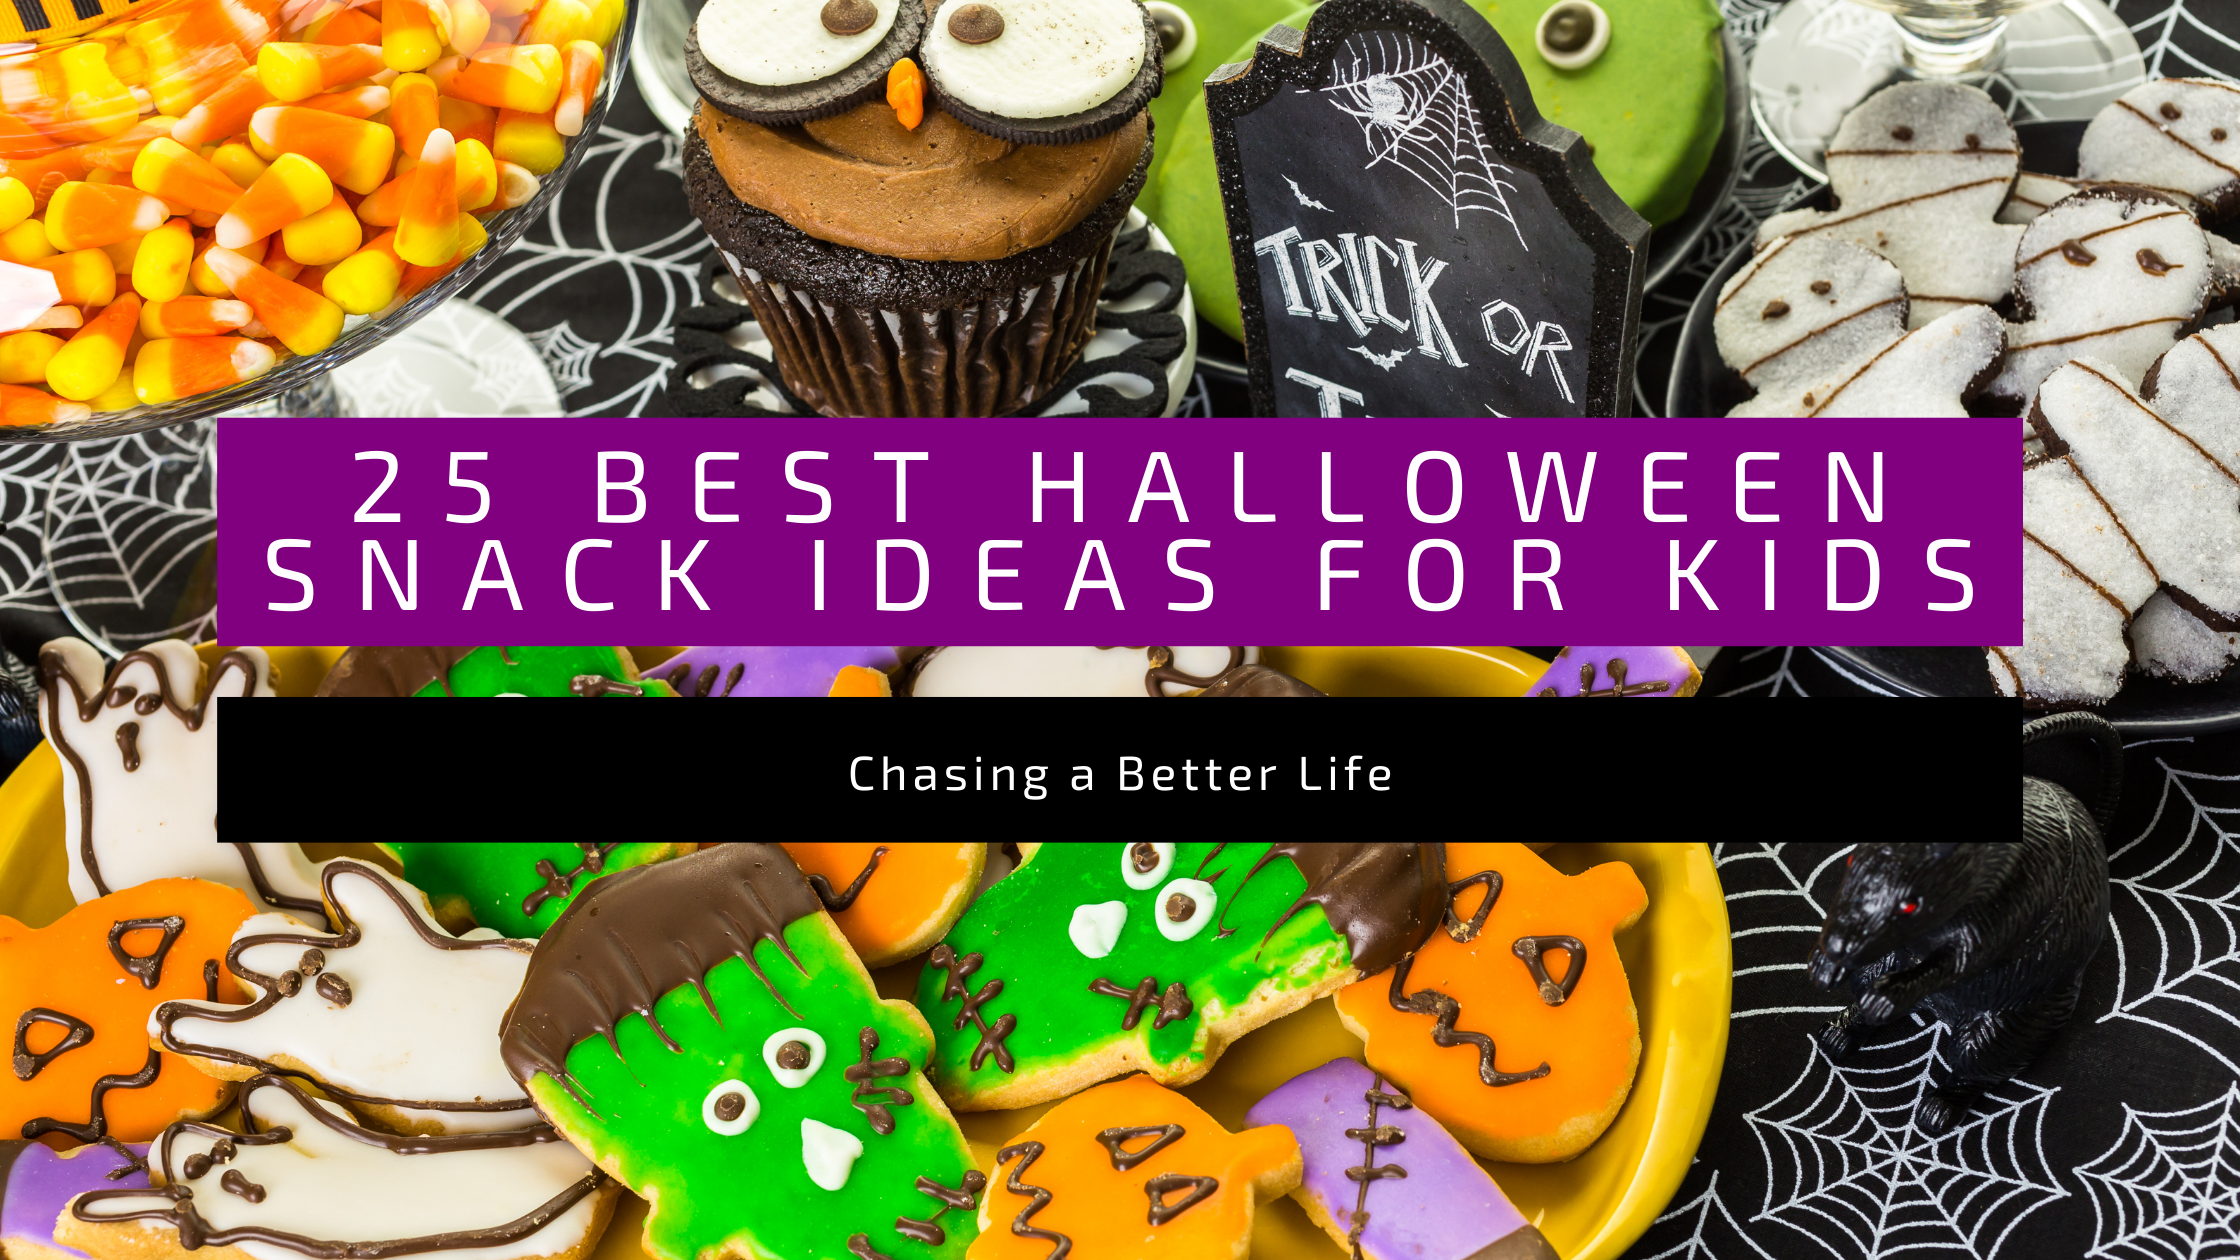 The 25 Best Halloween Snack Ideas for Kids 60